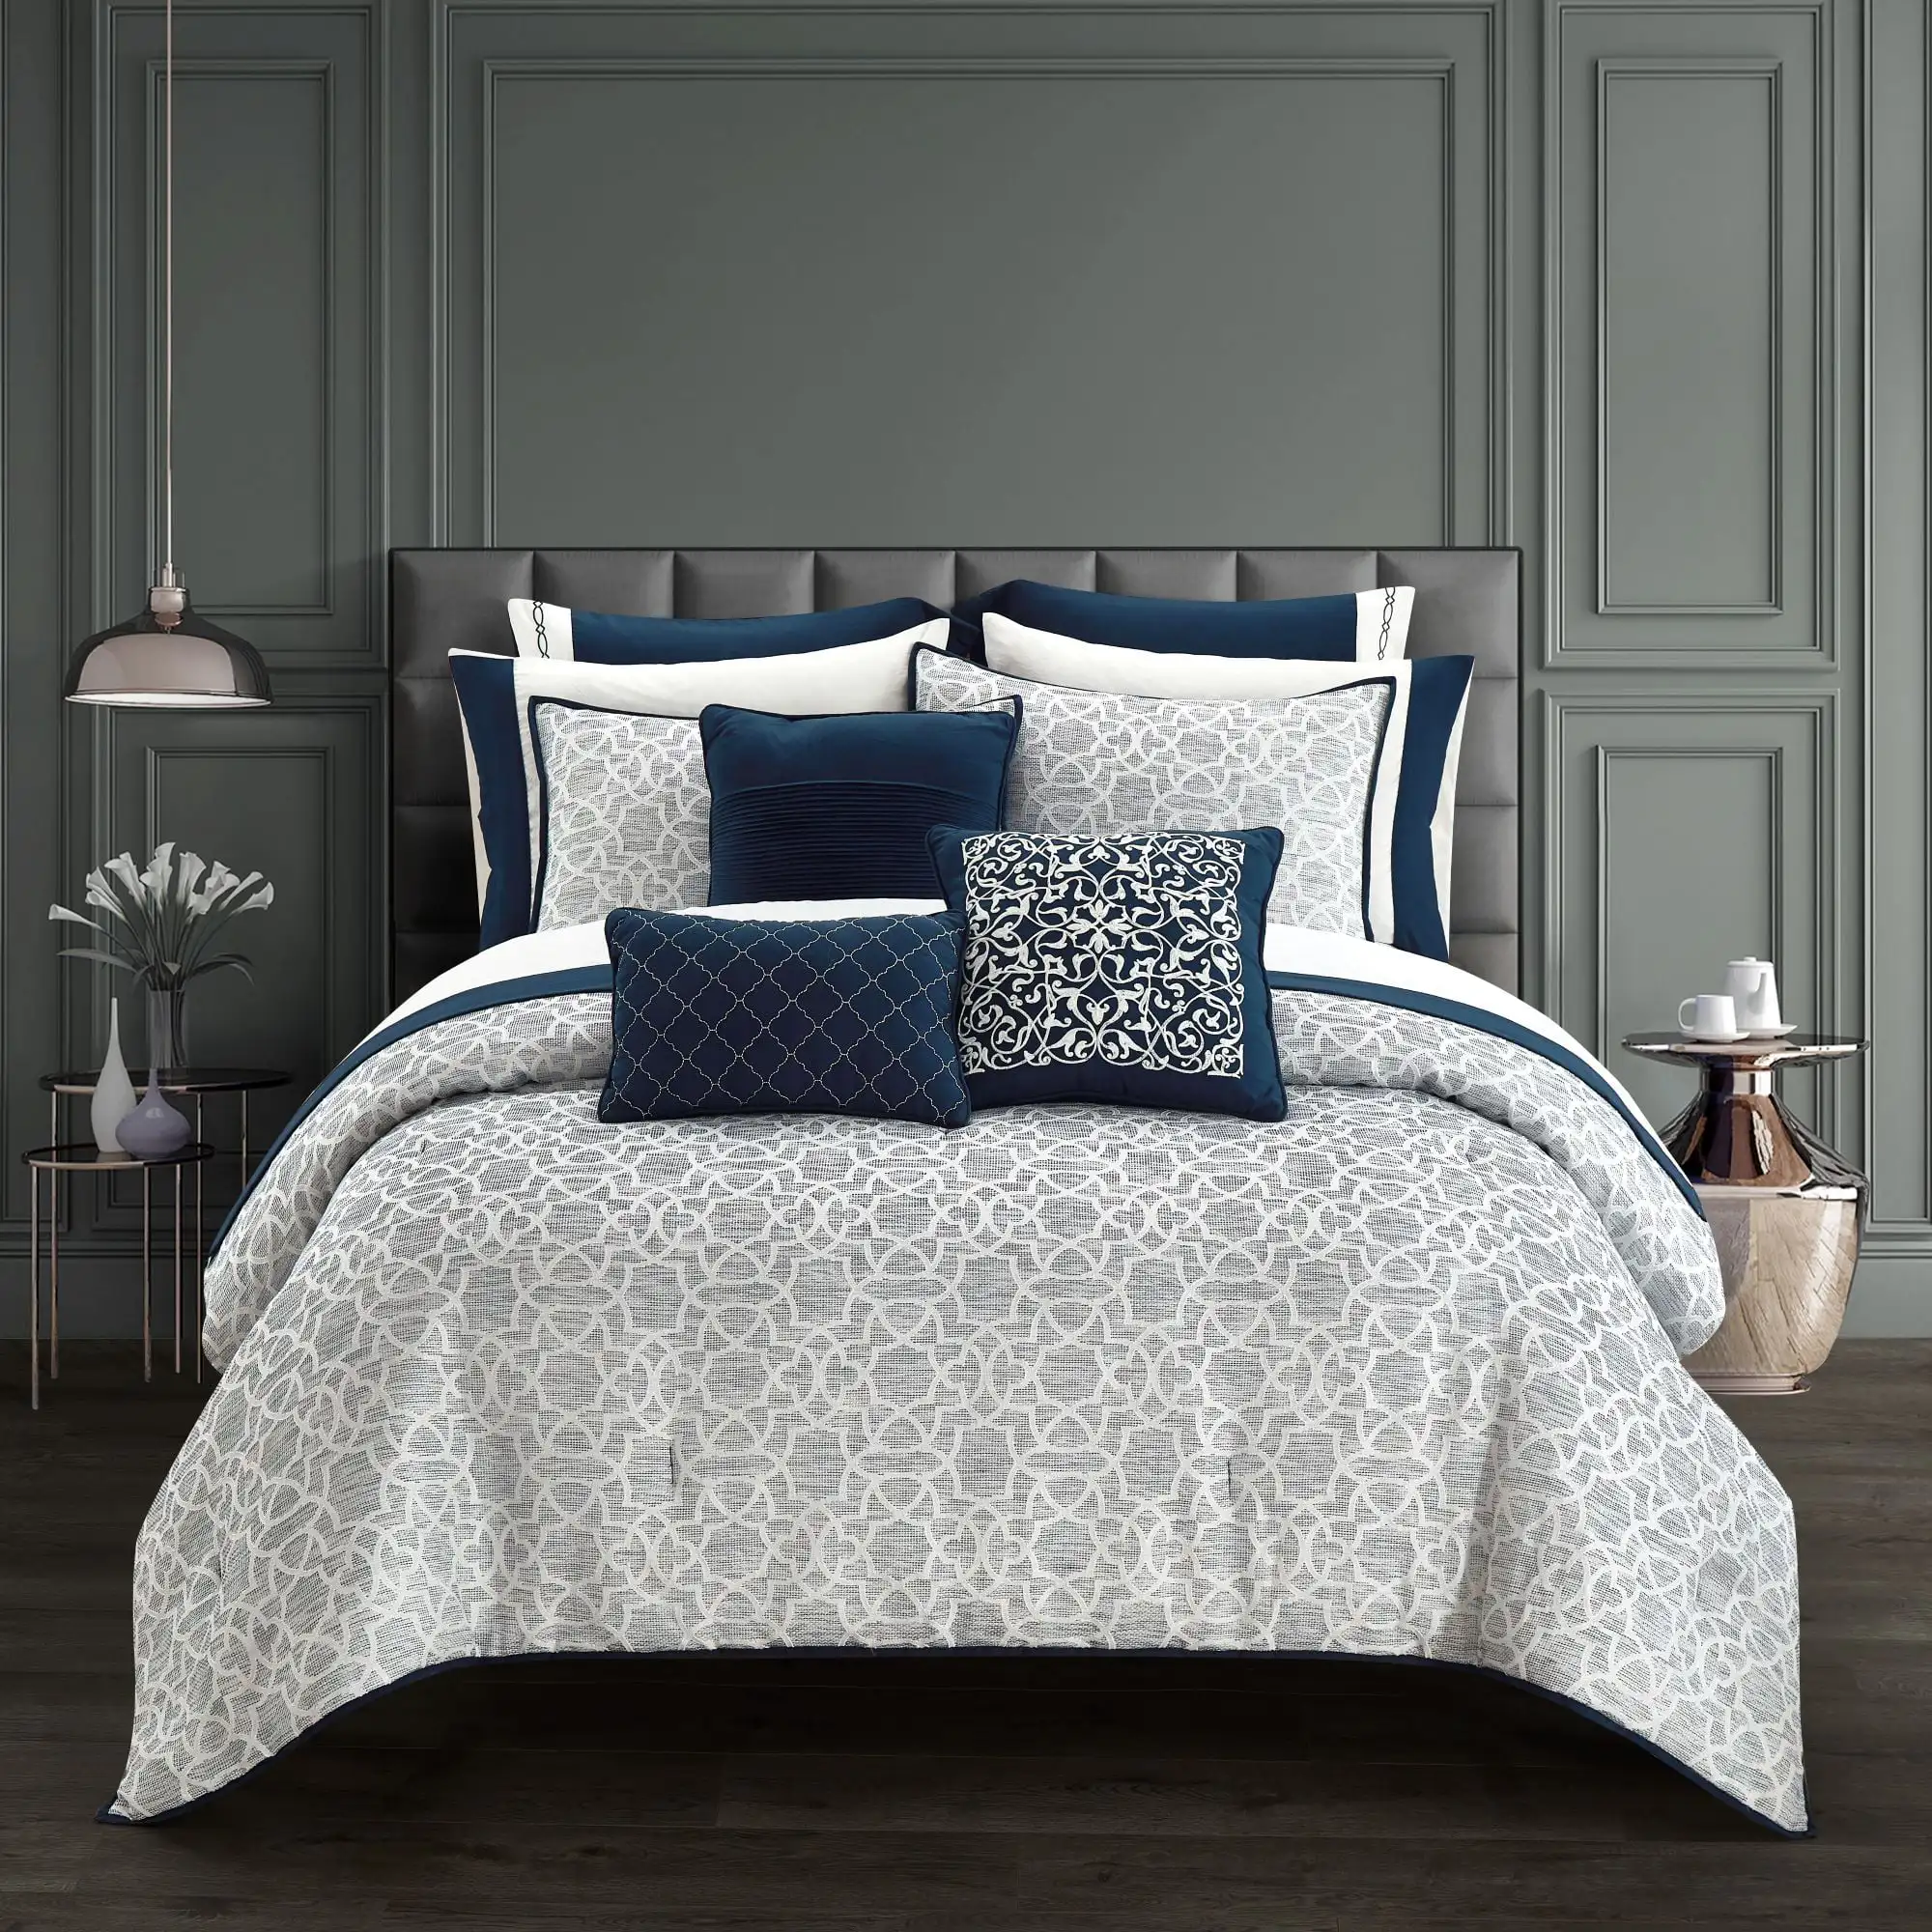 

Better Homes & Gardens Navy Buckingham Jacquard 12 Piece Pre Washed Bed in a Bag, QueenDouble duvet